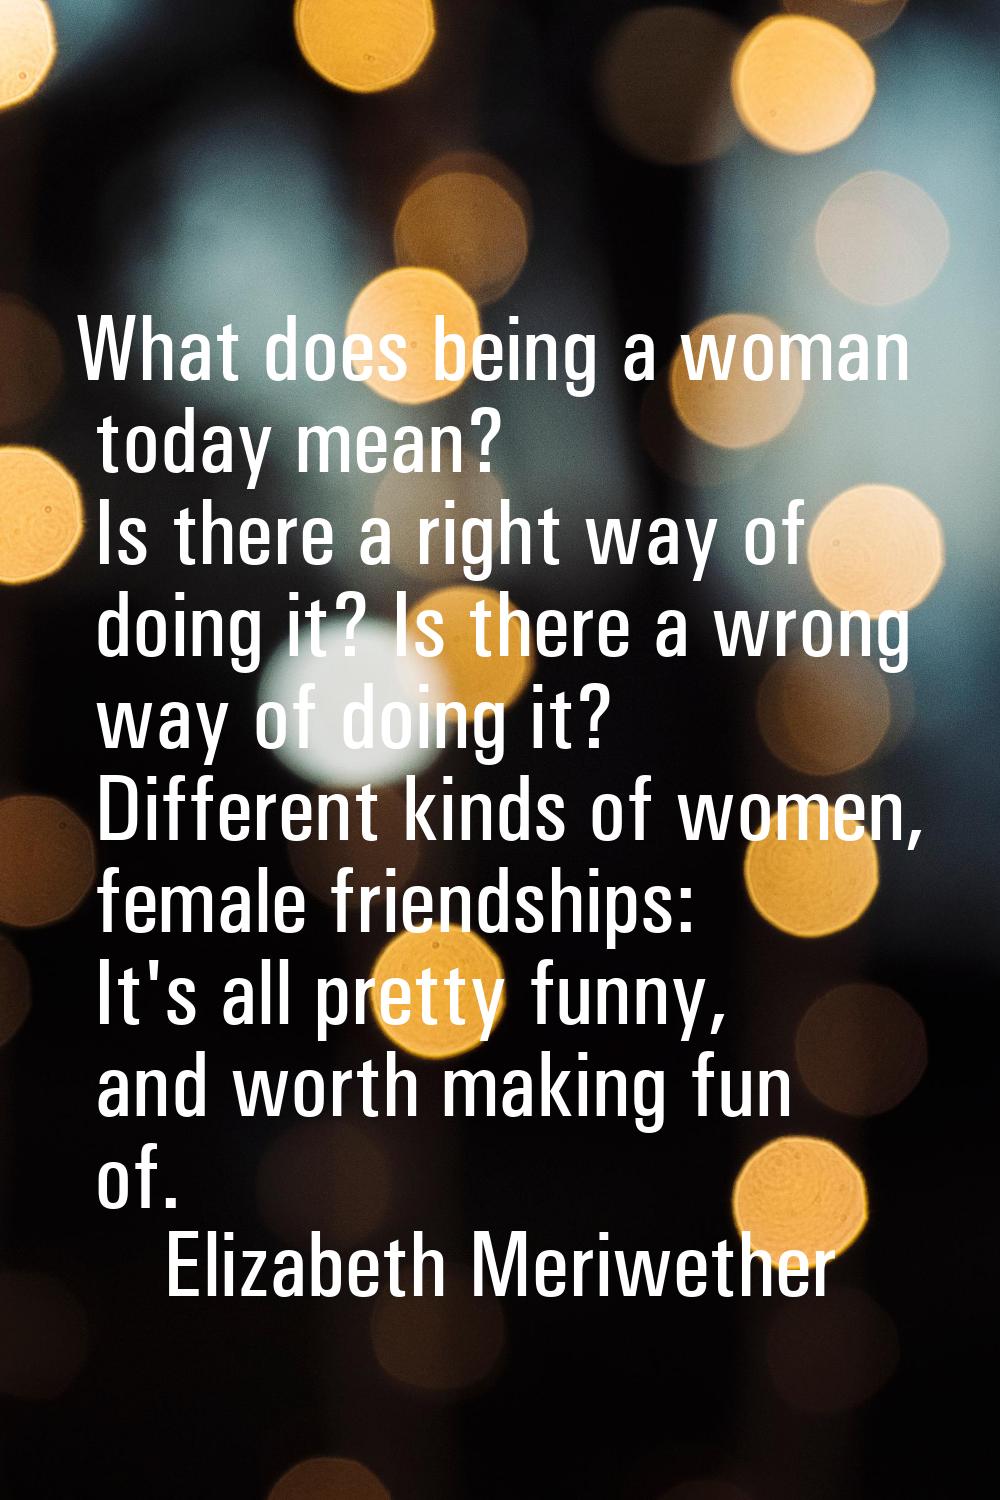 What does being a woman today mean? Is there a right way of doing it? Is there a wrong way of doing